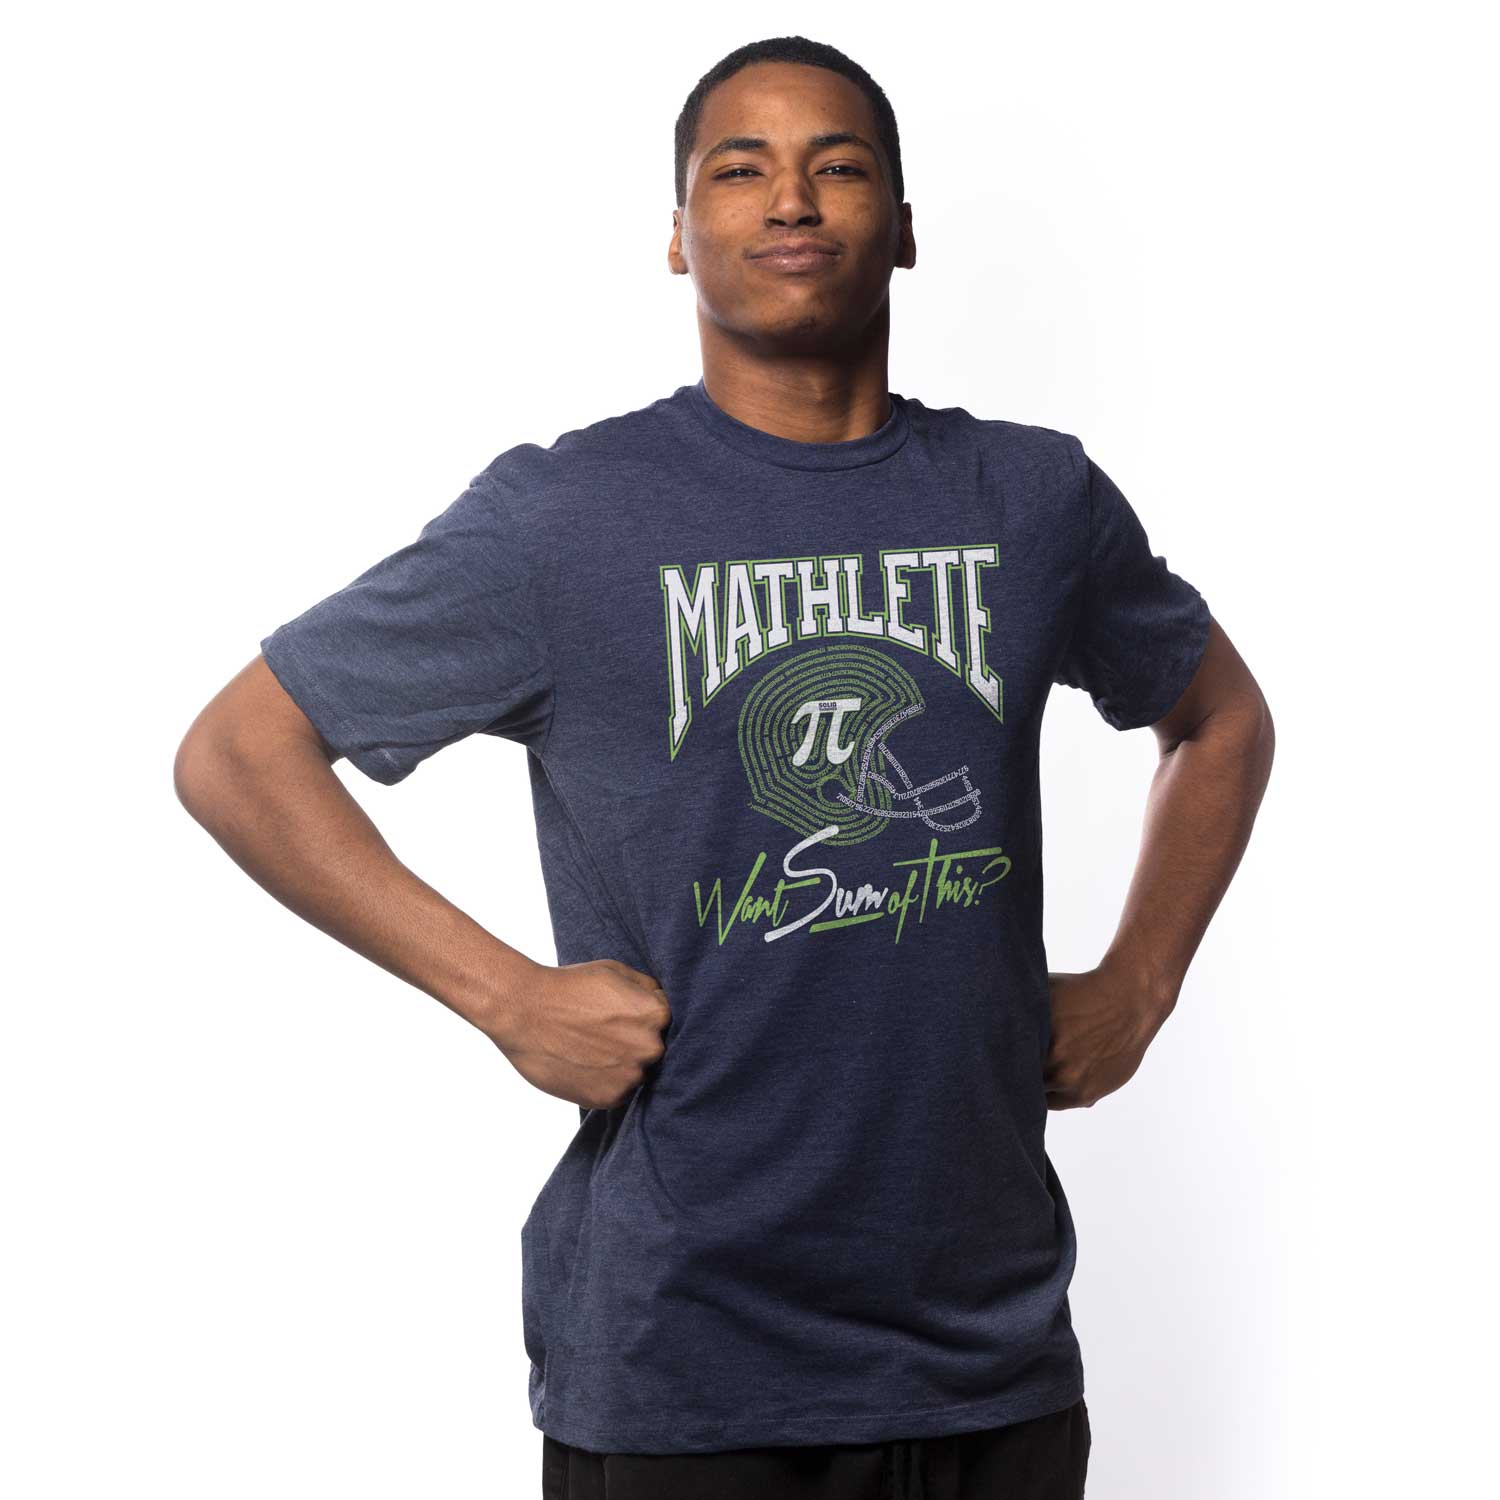 Men's Mathlete Want Sum of This Graphic Tee | Funny STEM T-Shirt on Model